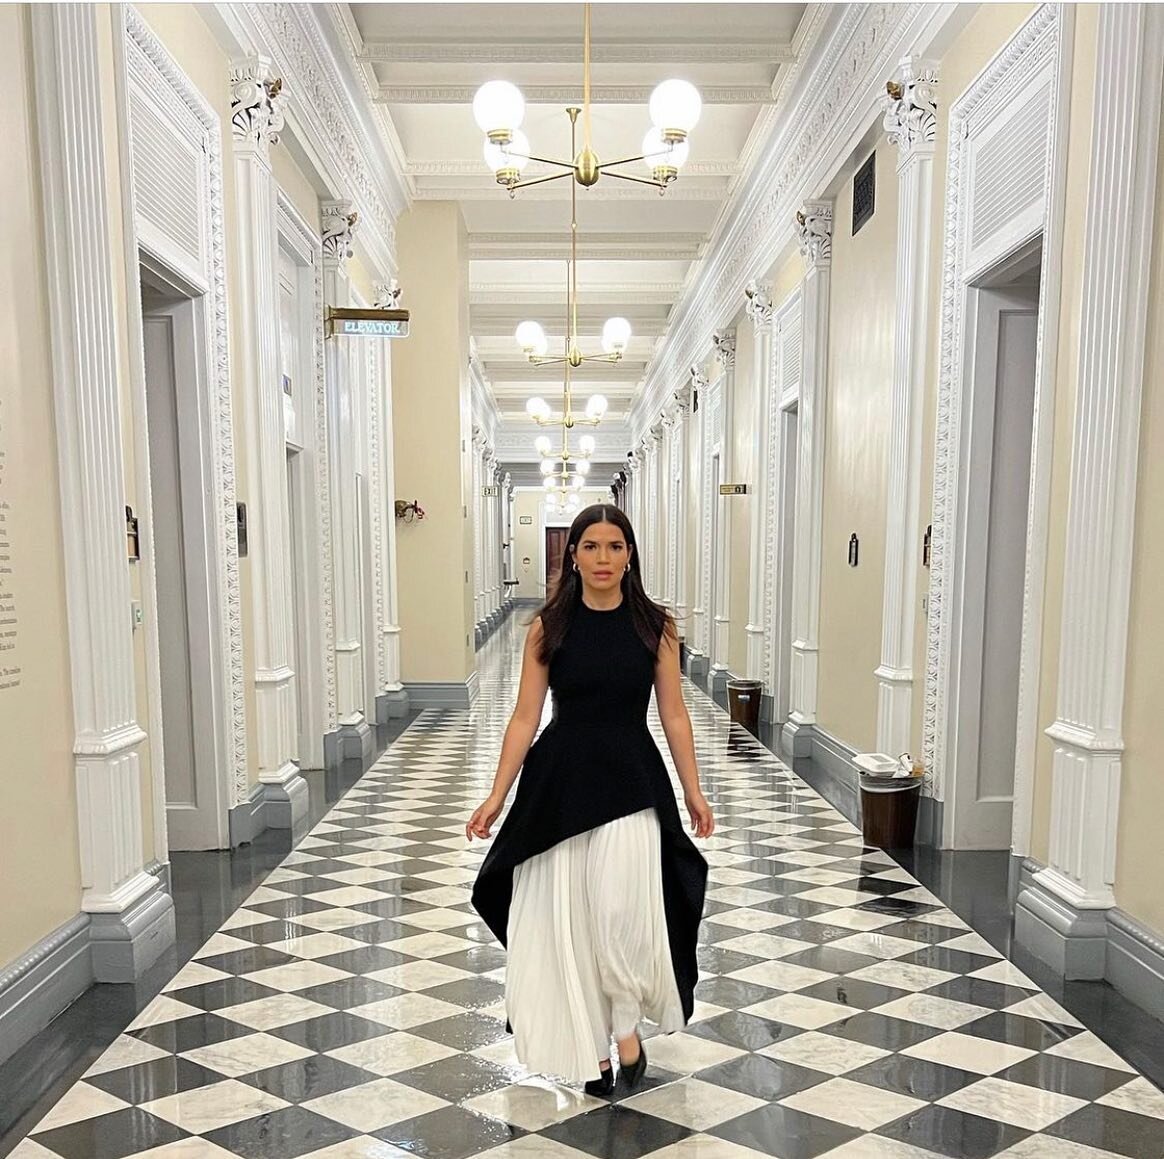 Glam on @americaferrera as she visited the White House with @poderistas 💜 What&rsquo;s more gorgeous than working with gorgeous women doing amazing work using their voices to shift perspectives, uplift and inform!